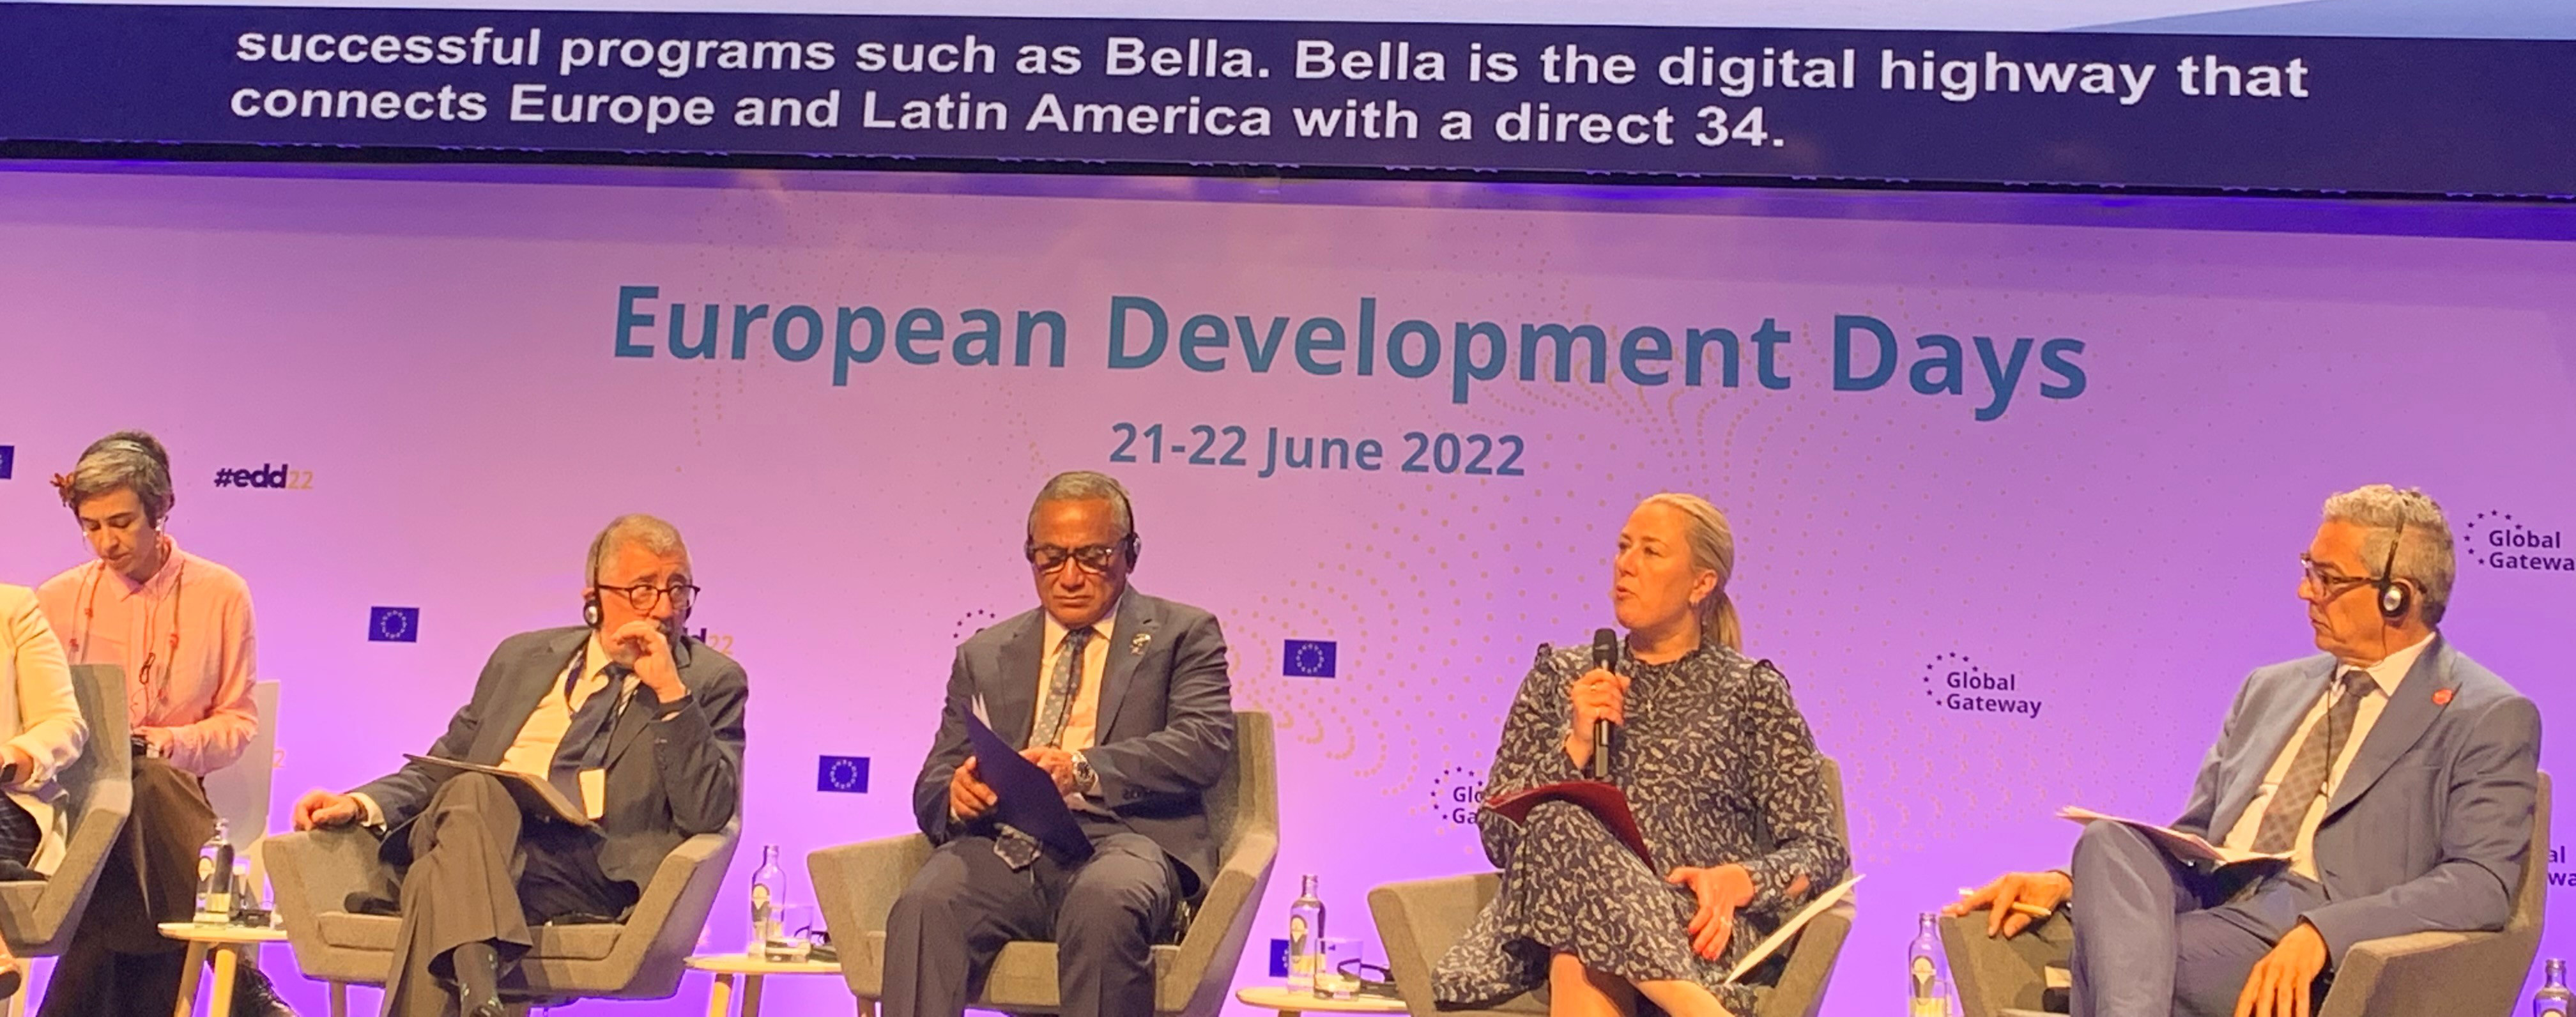 Jutta Urpilainen, EU Commissioner for International Partnerships: “BELLA is the digital highway that connects Europe and Latin America”